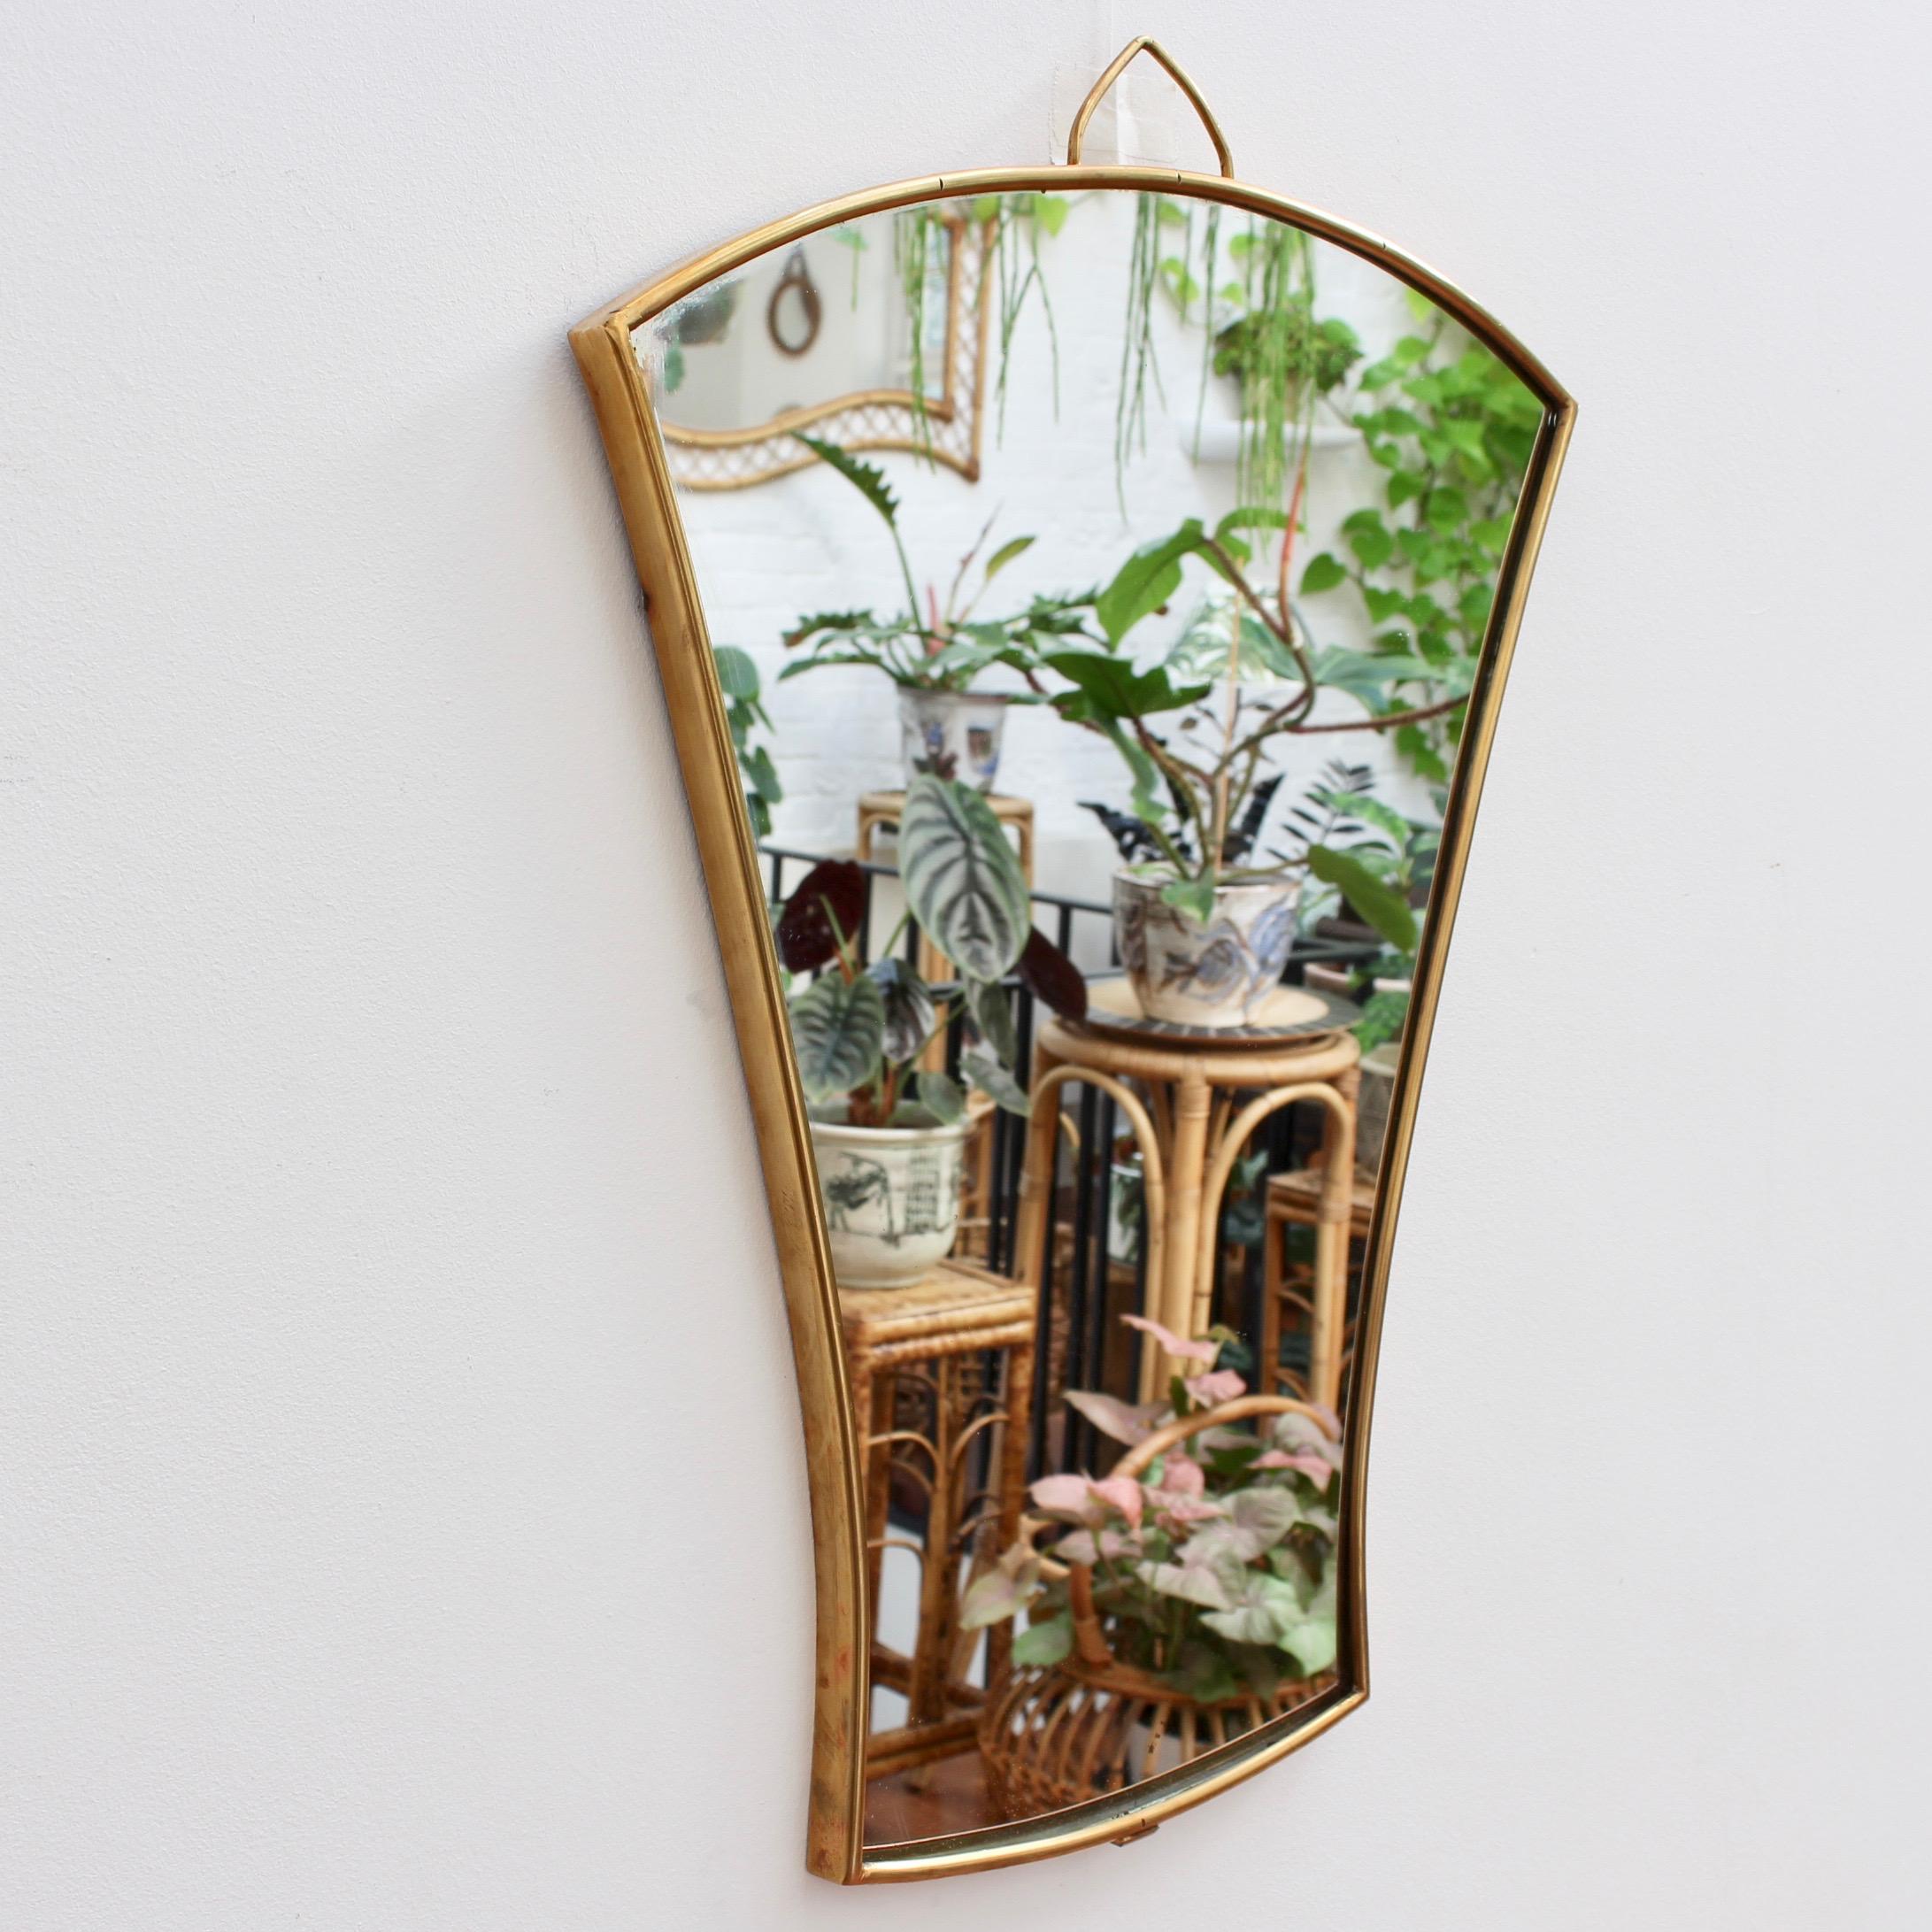 A midcentury Italian wall mirror with brass frame (circa 1950s). The small mirror is in the form of a folding fan. Classically elegant and distinctive in a modern Gio Ponti style. This mirror is in fair vintage condition. There are some evident